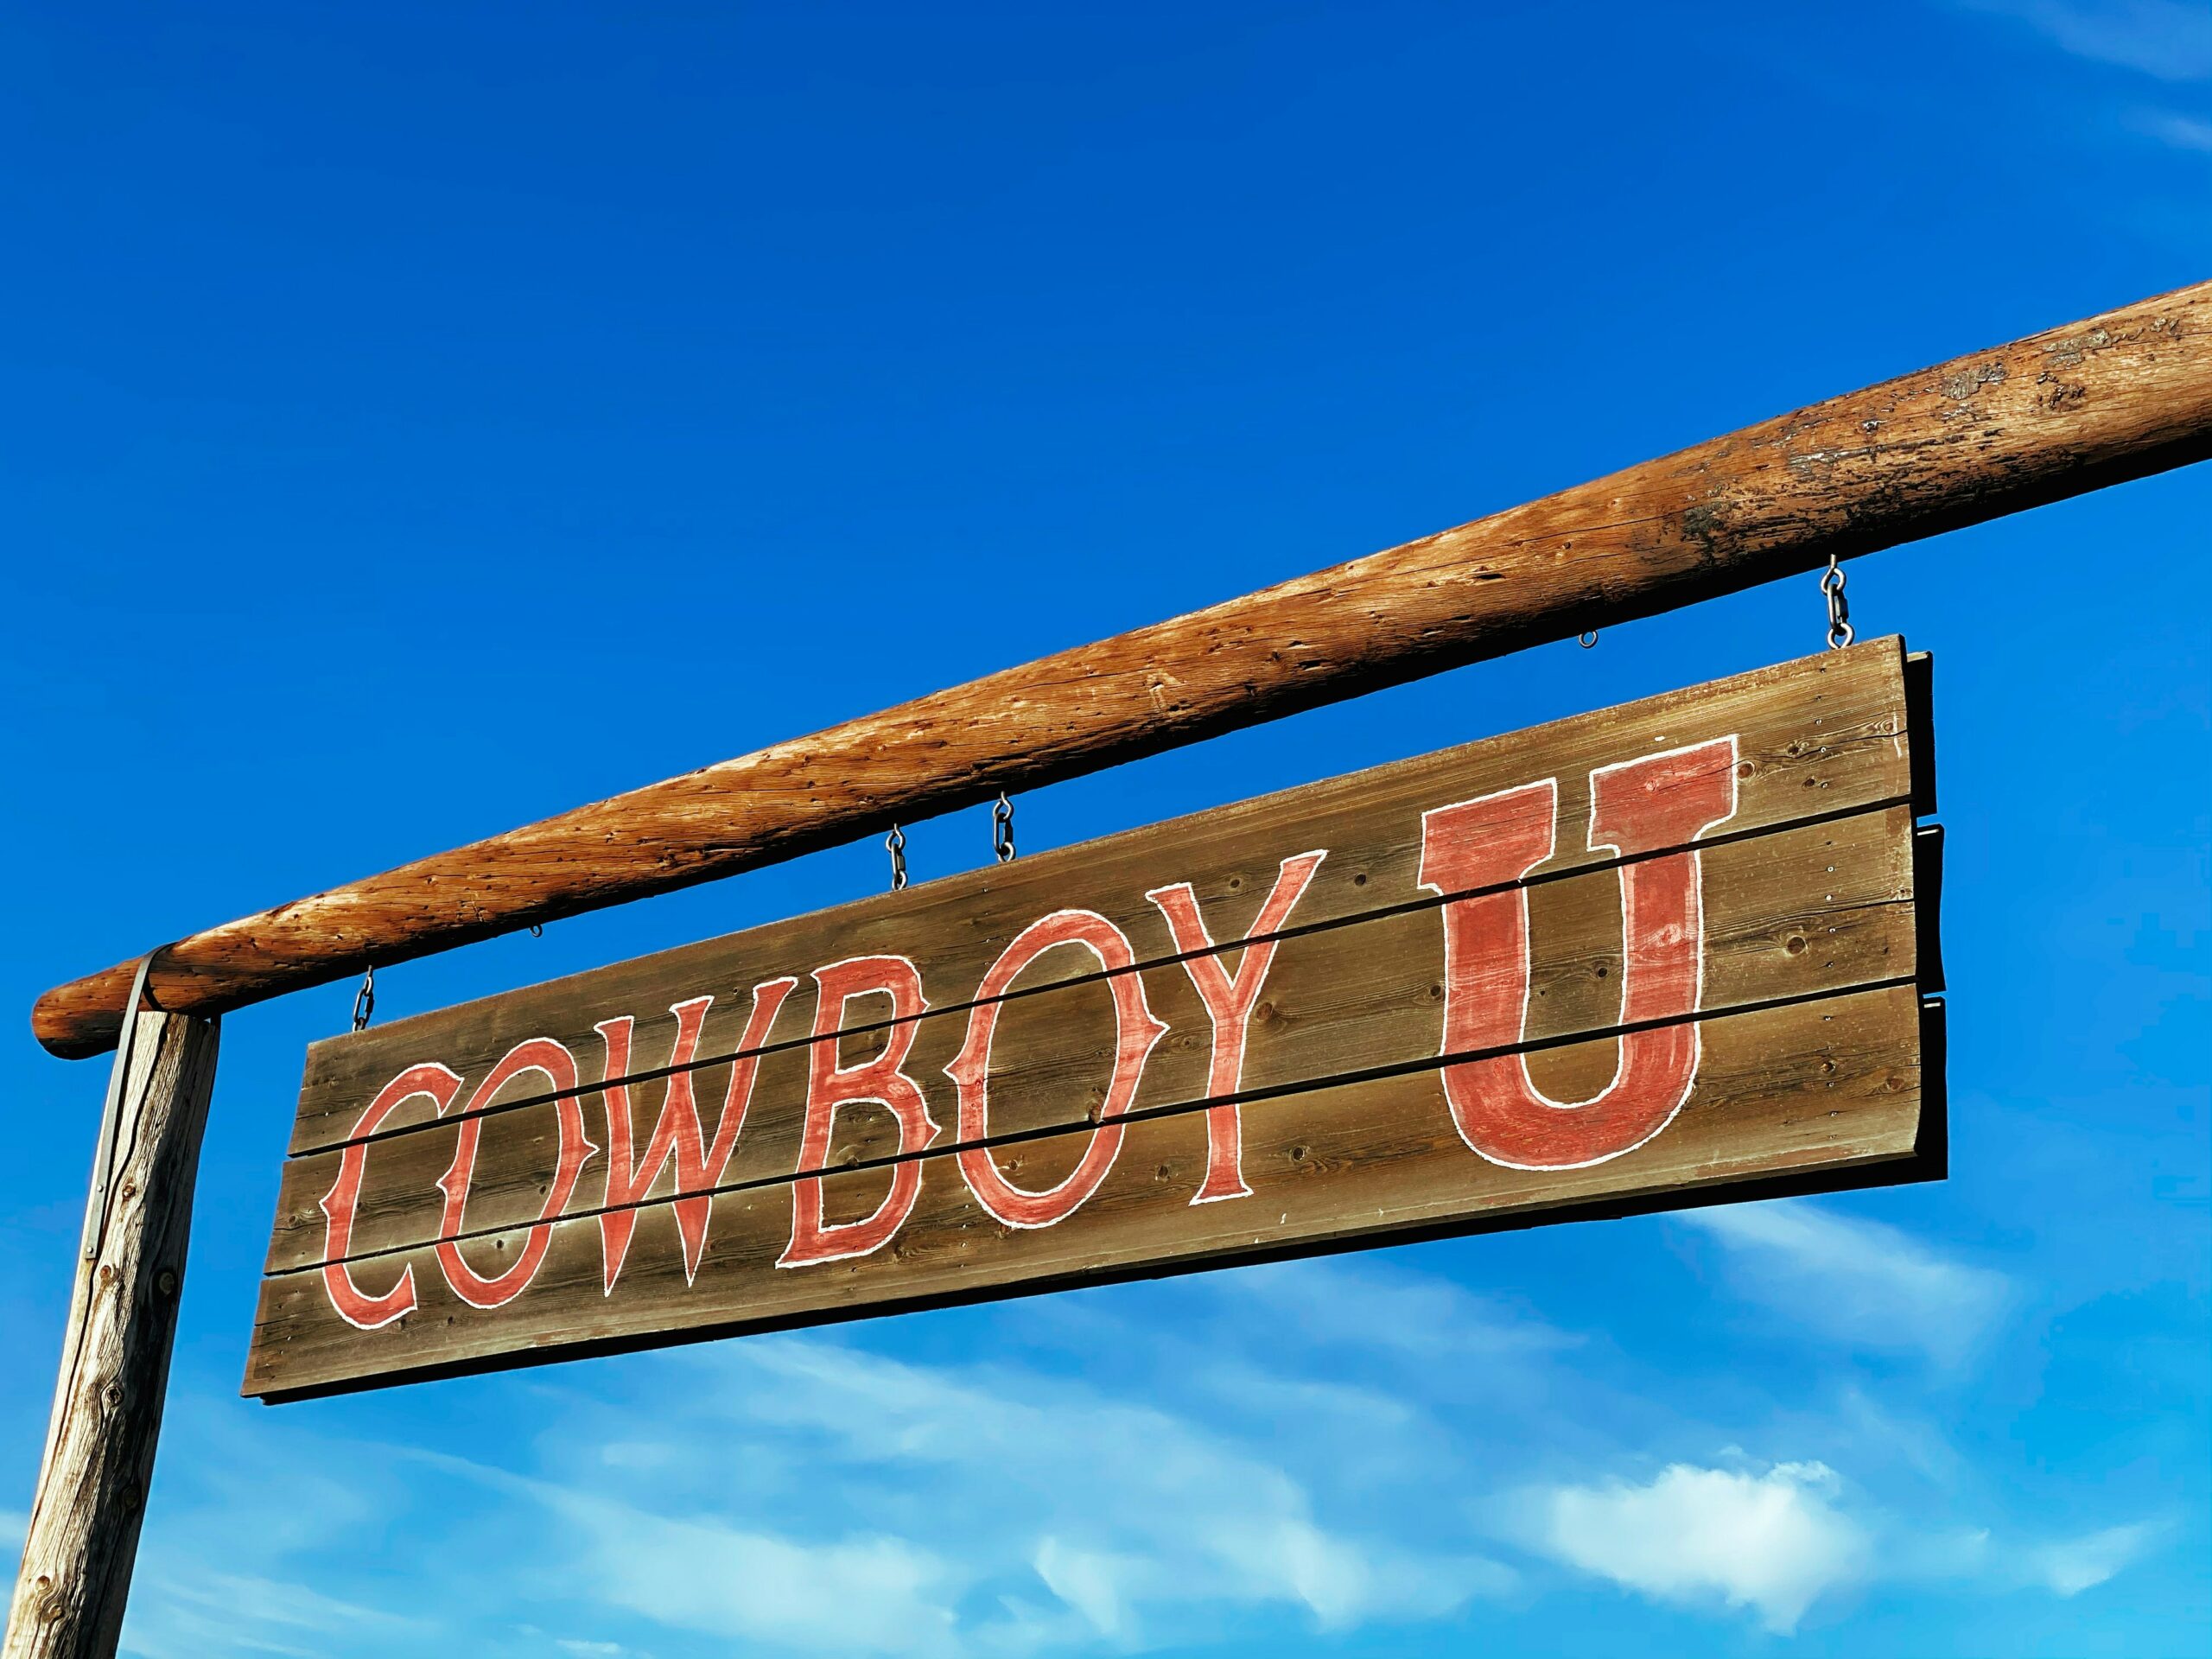 The COBOL Cowboys: The story of a modern western in the banking world